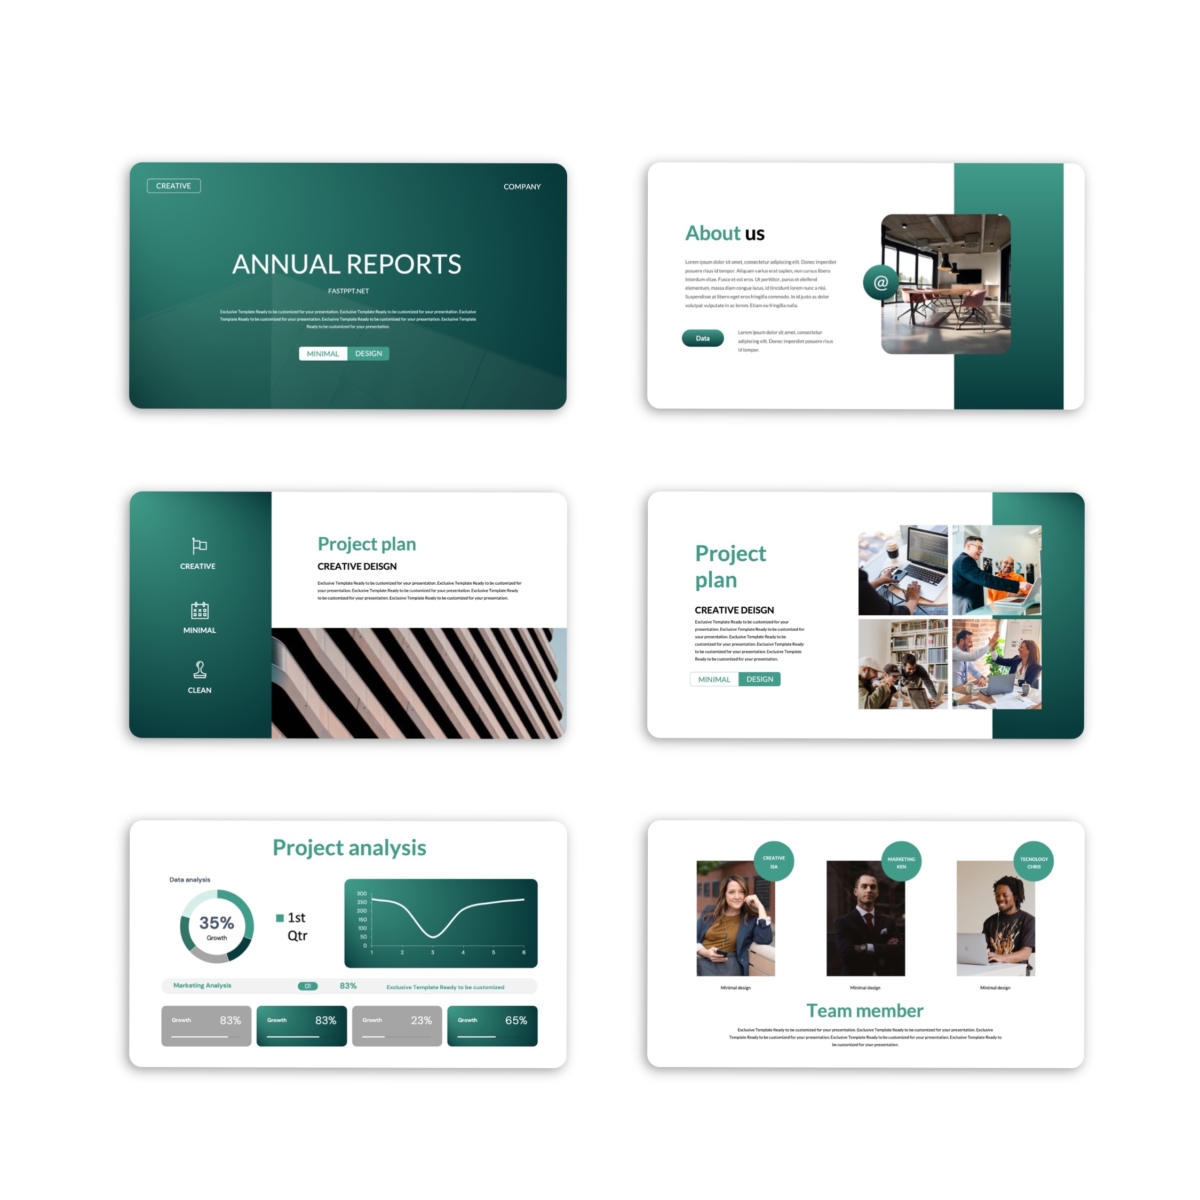 Success Business Annual Report PowerPoint Template